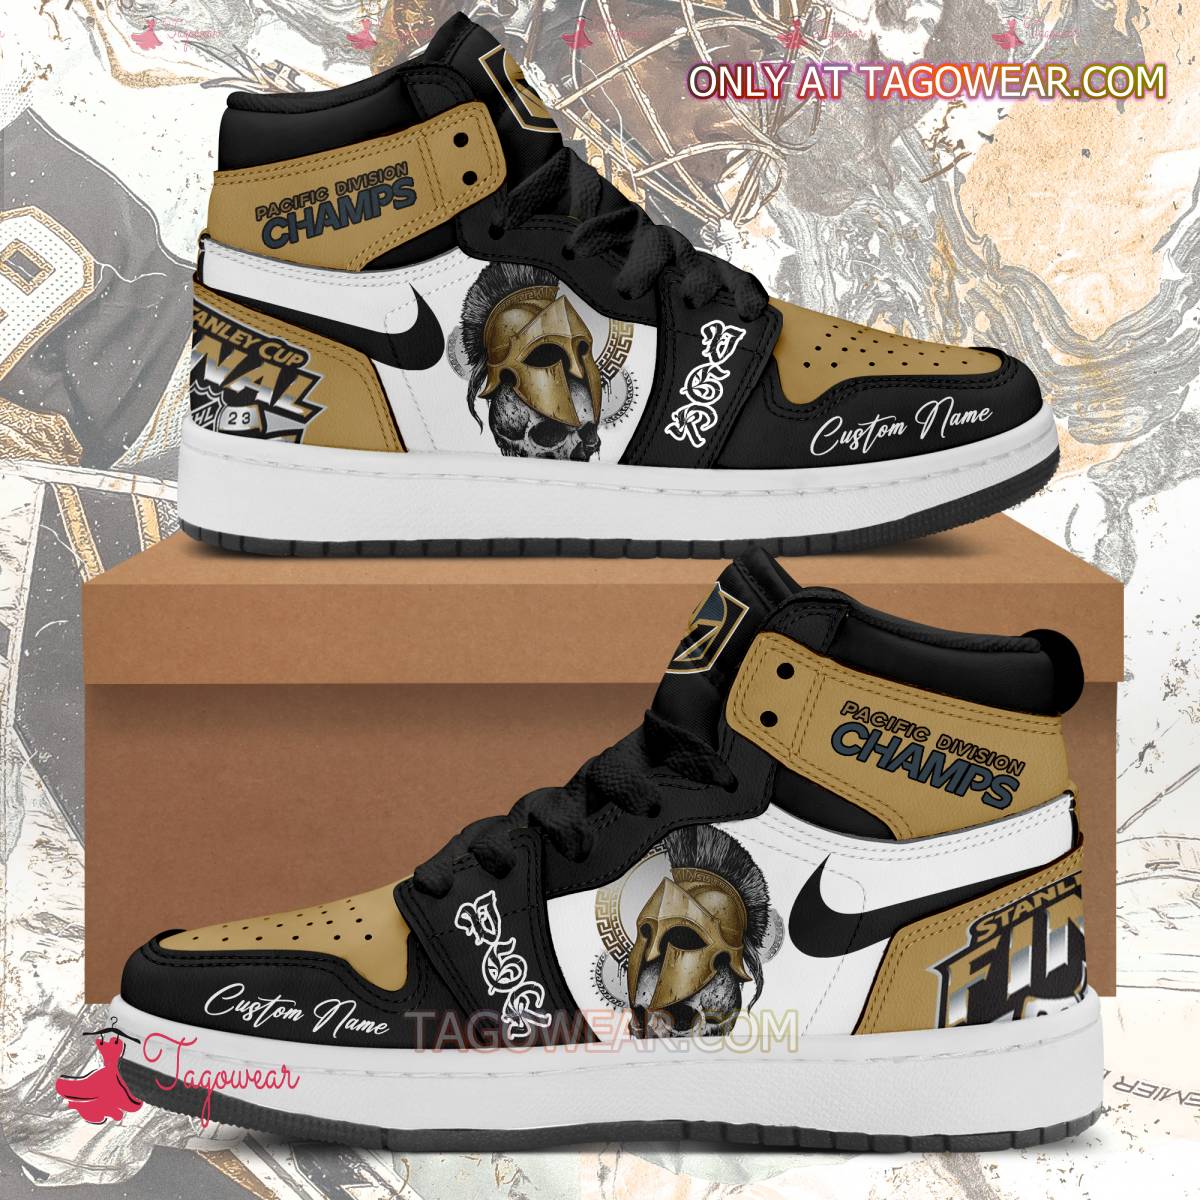 Vegas Golden Knight Pacific Division Champs Personalized Air Jordan High Top Shoes